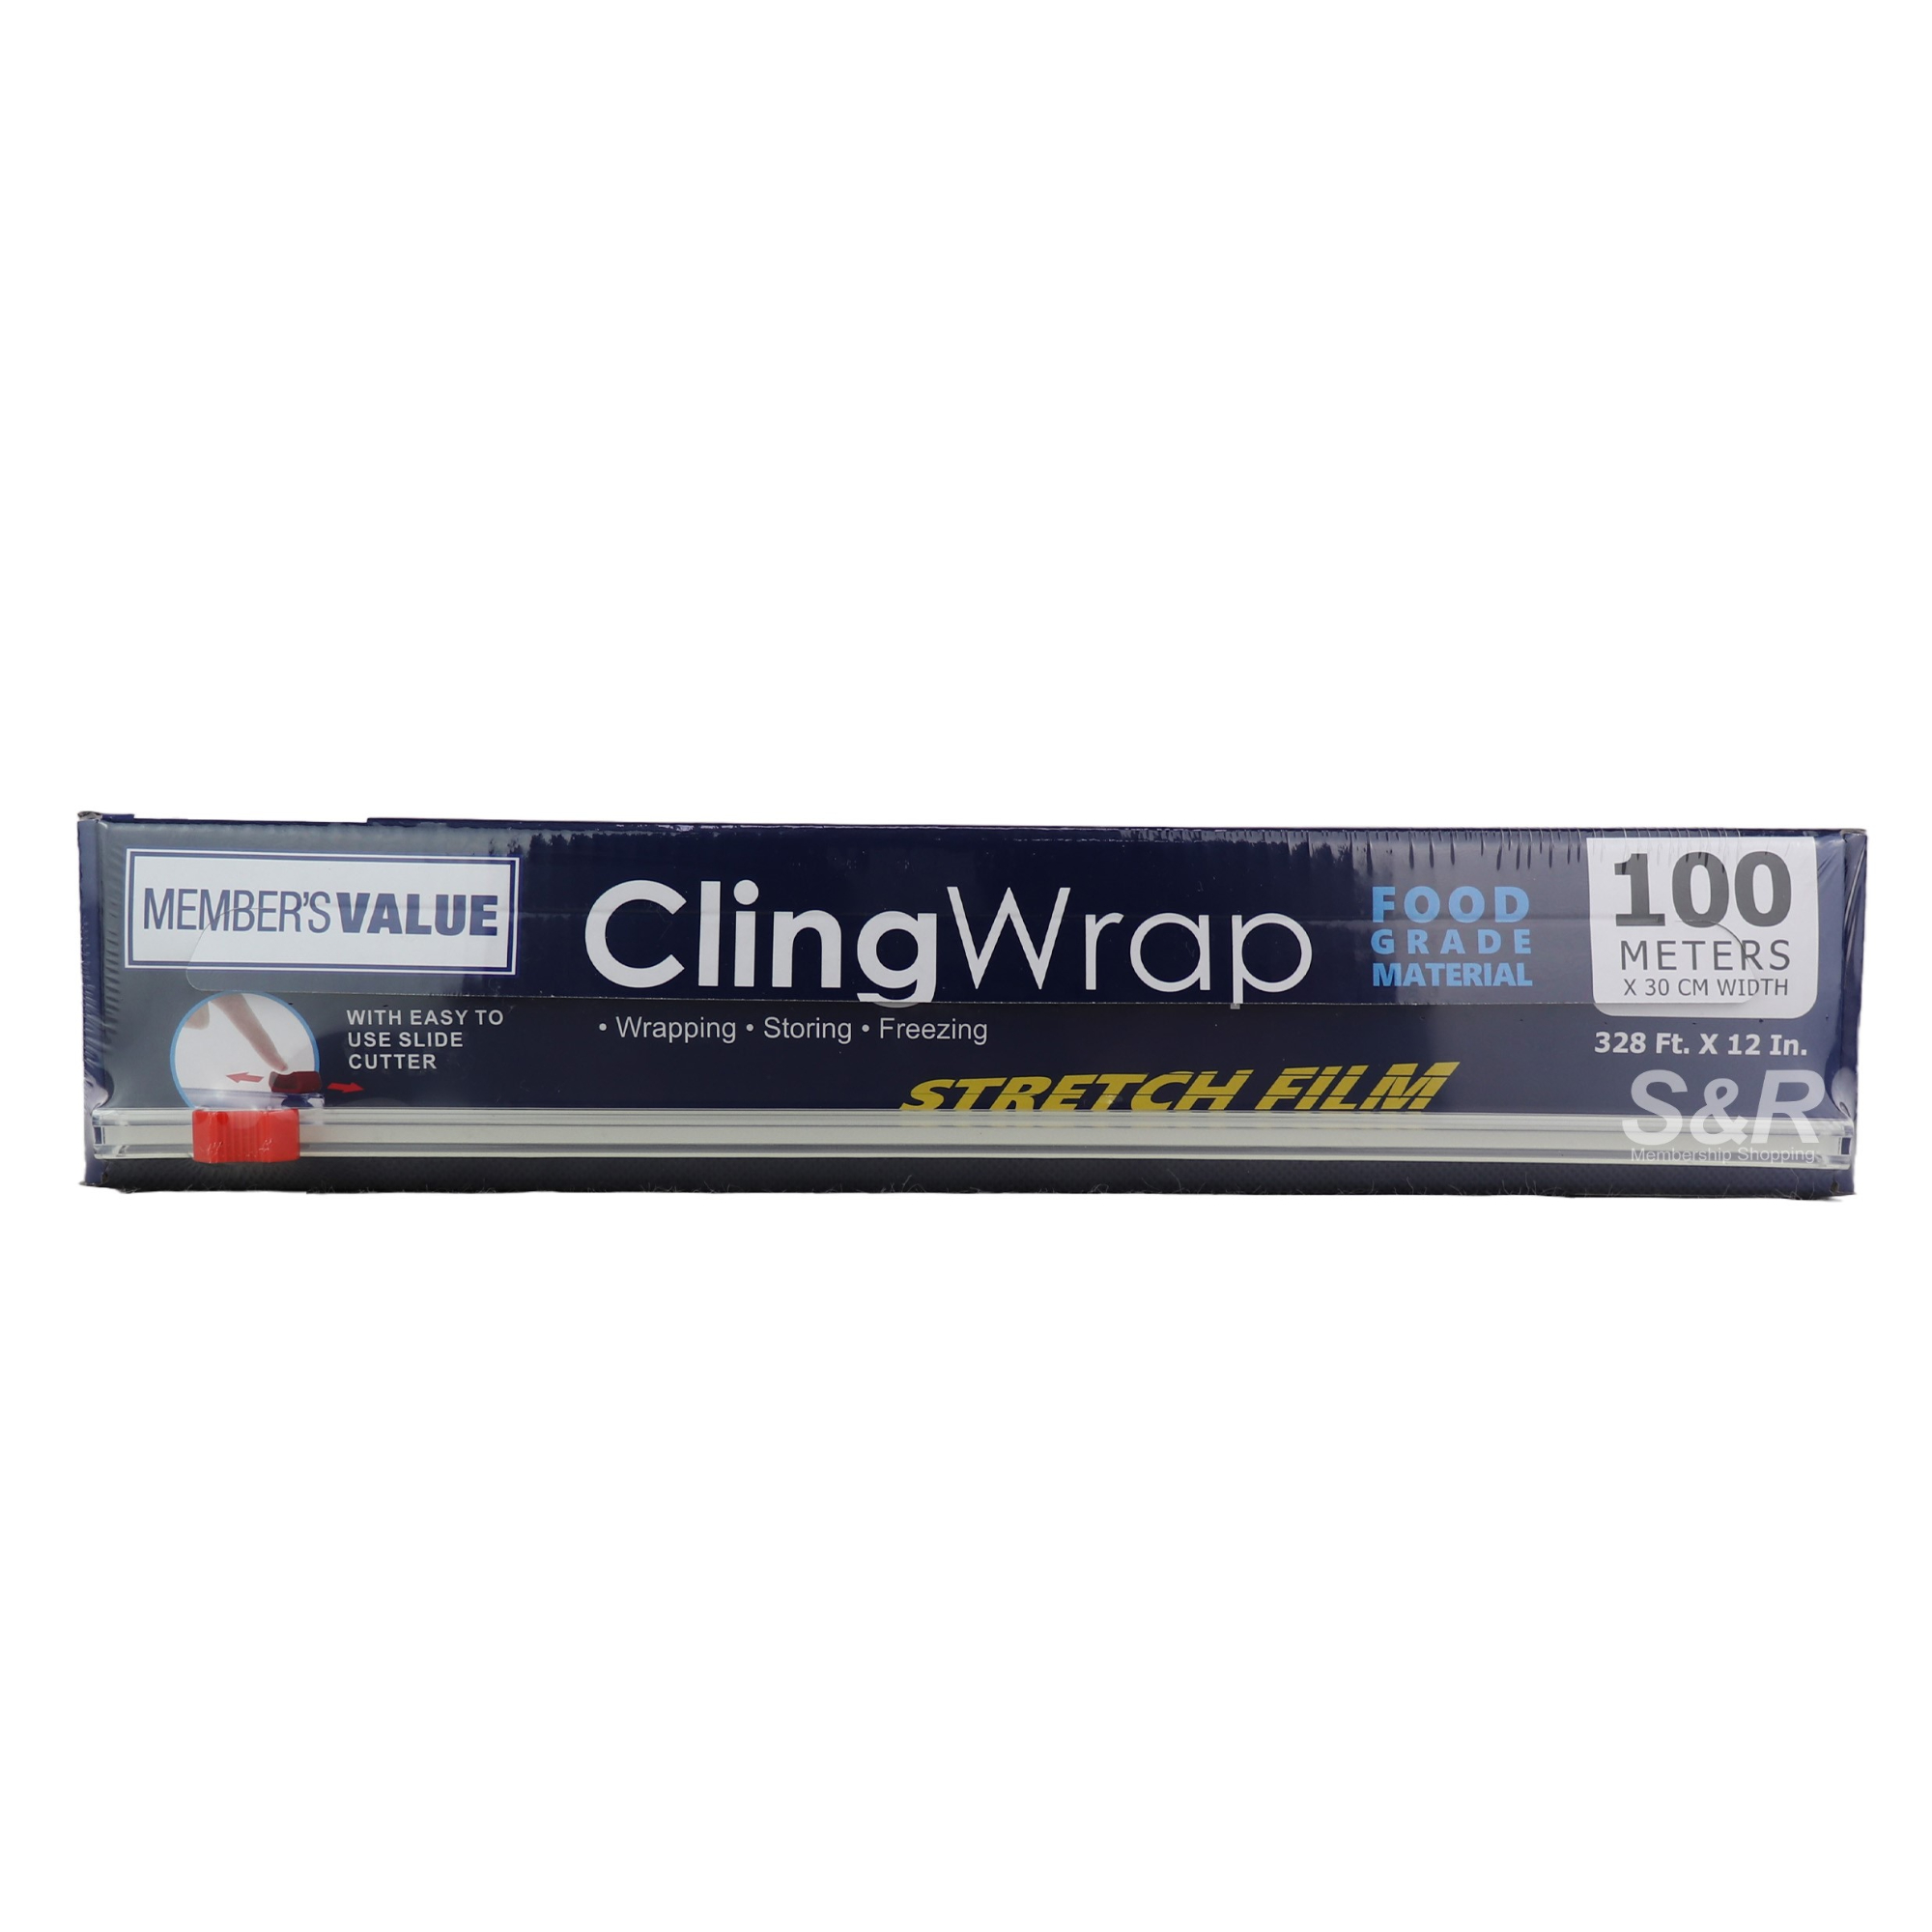 Member's Value Cling Wrap 1pc